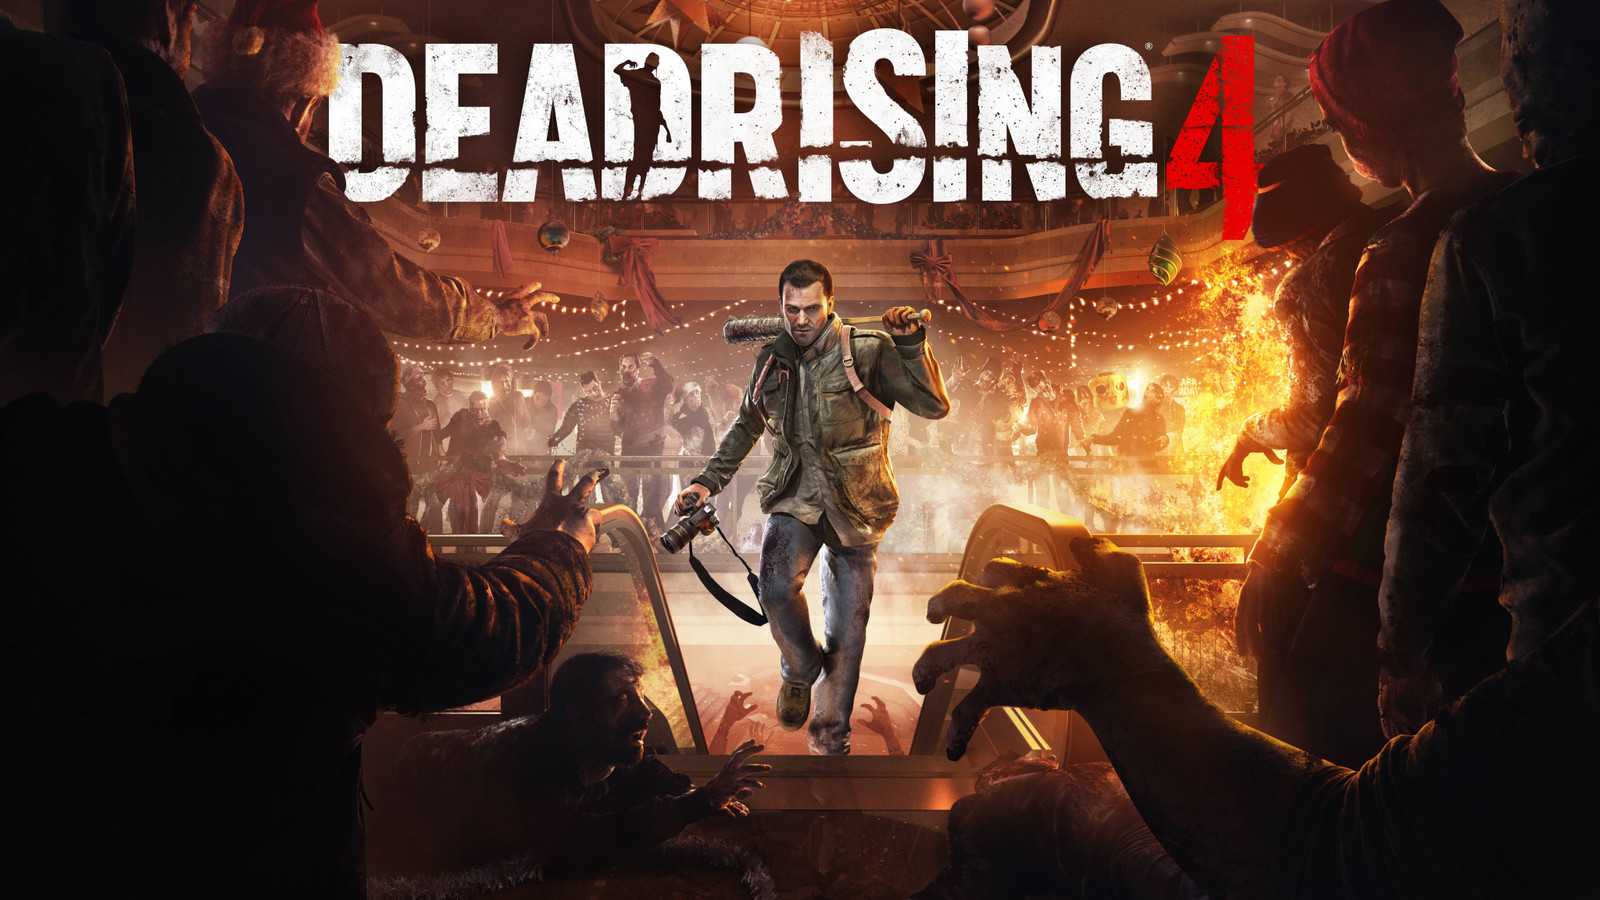 Christmas Comes Early In New Dead Rising 4 Trailer - Rely ...